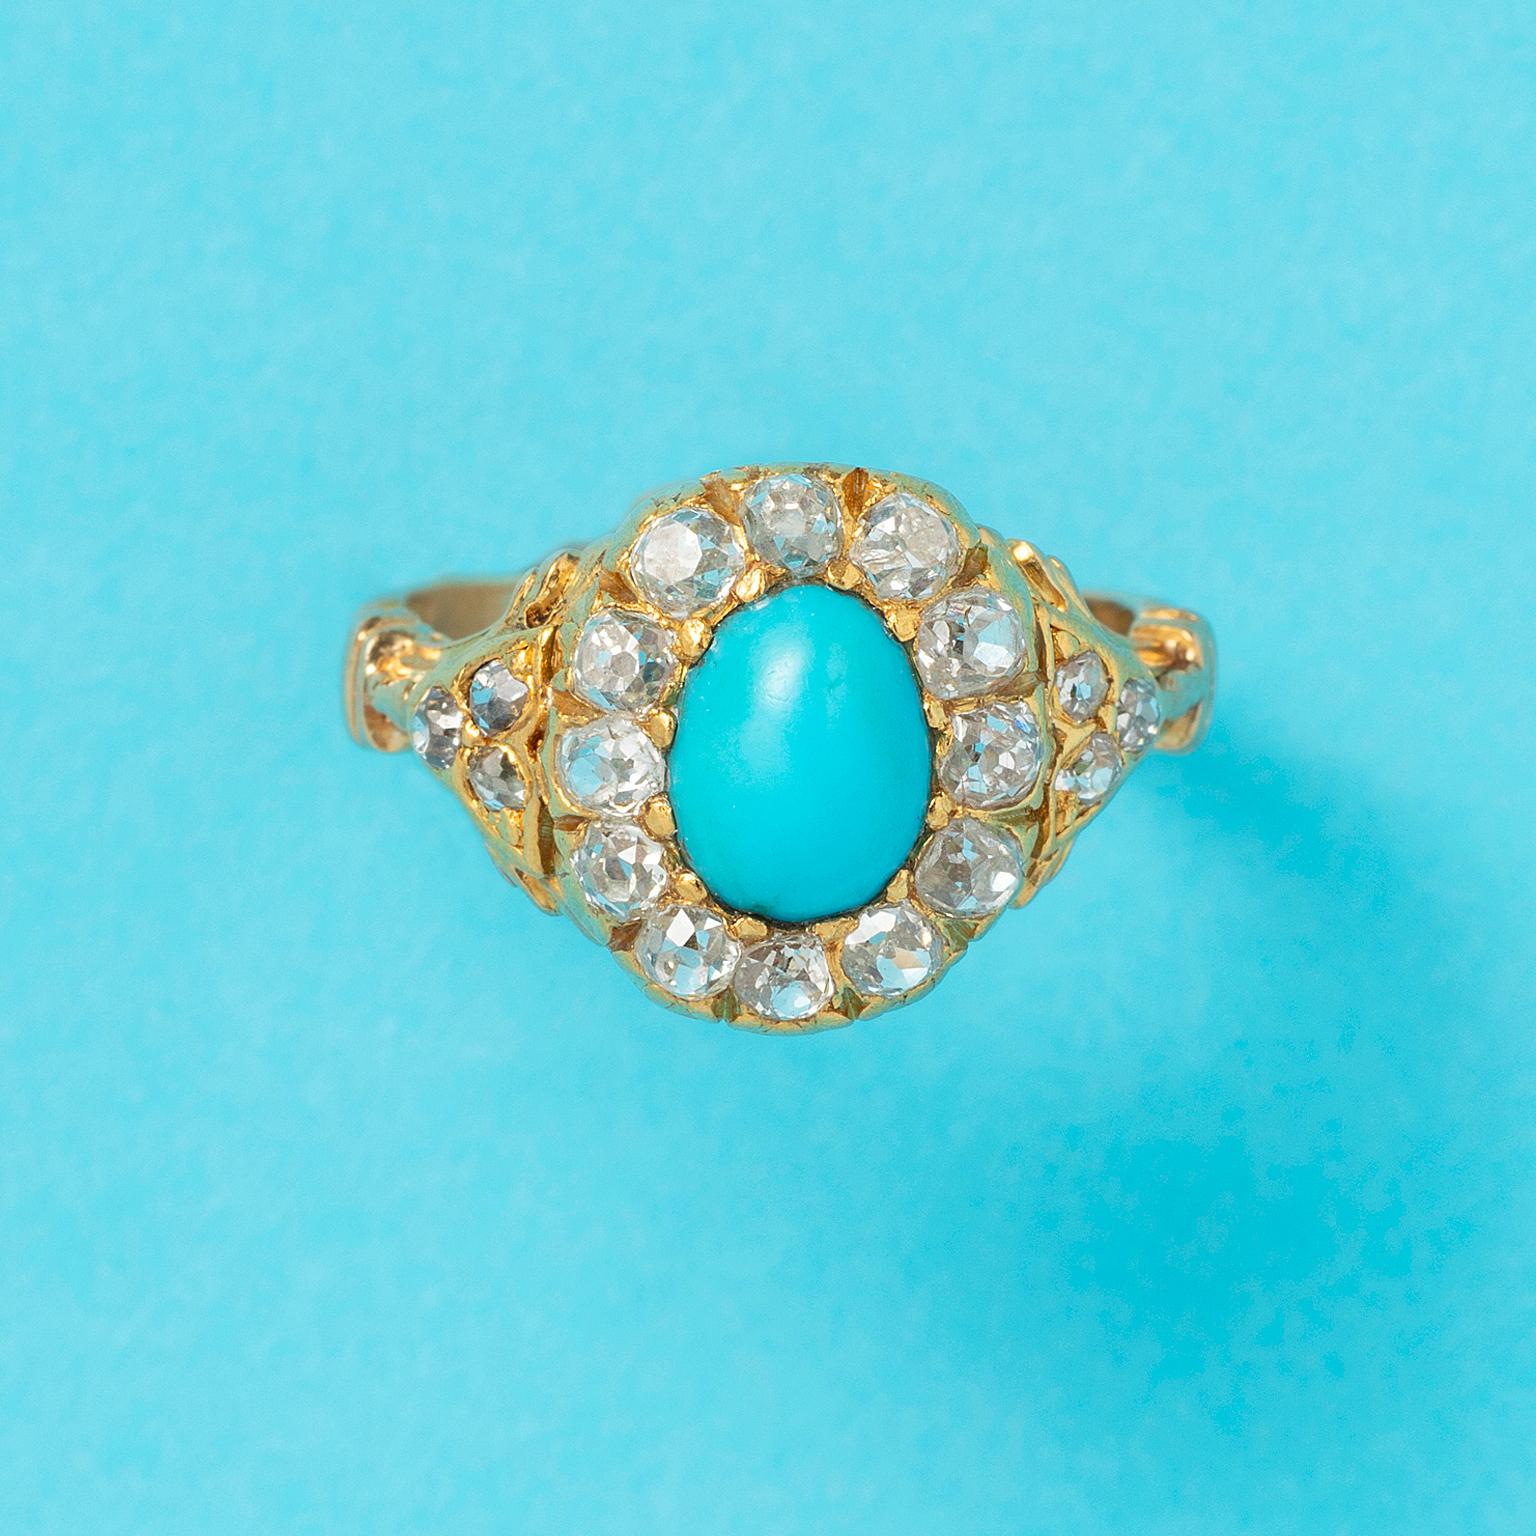 An antique, 18 carat yellow gold cluster ring set with an oval, cabochon cut turquoise surrounded with twelve old cut diamonds and with three old cuts on each side in the shank (in total app. 1.4 carat), most likely English in origin, end 19th